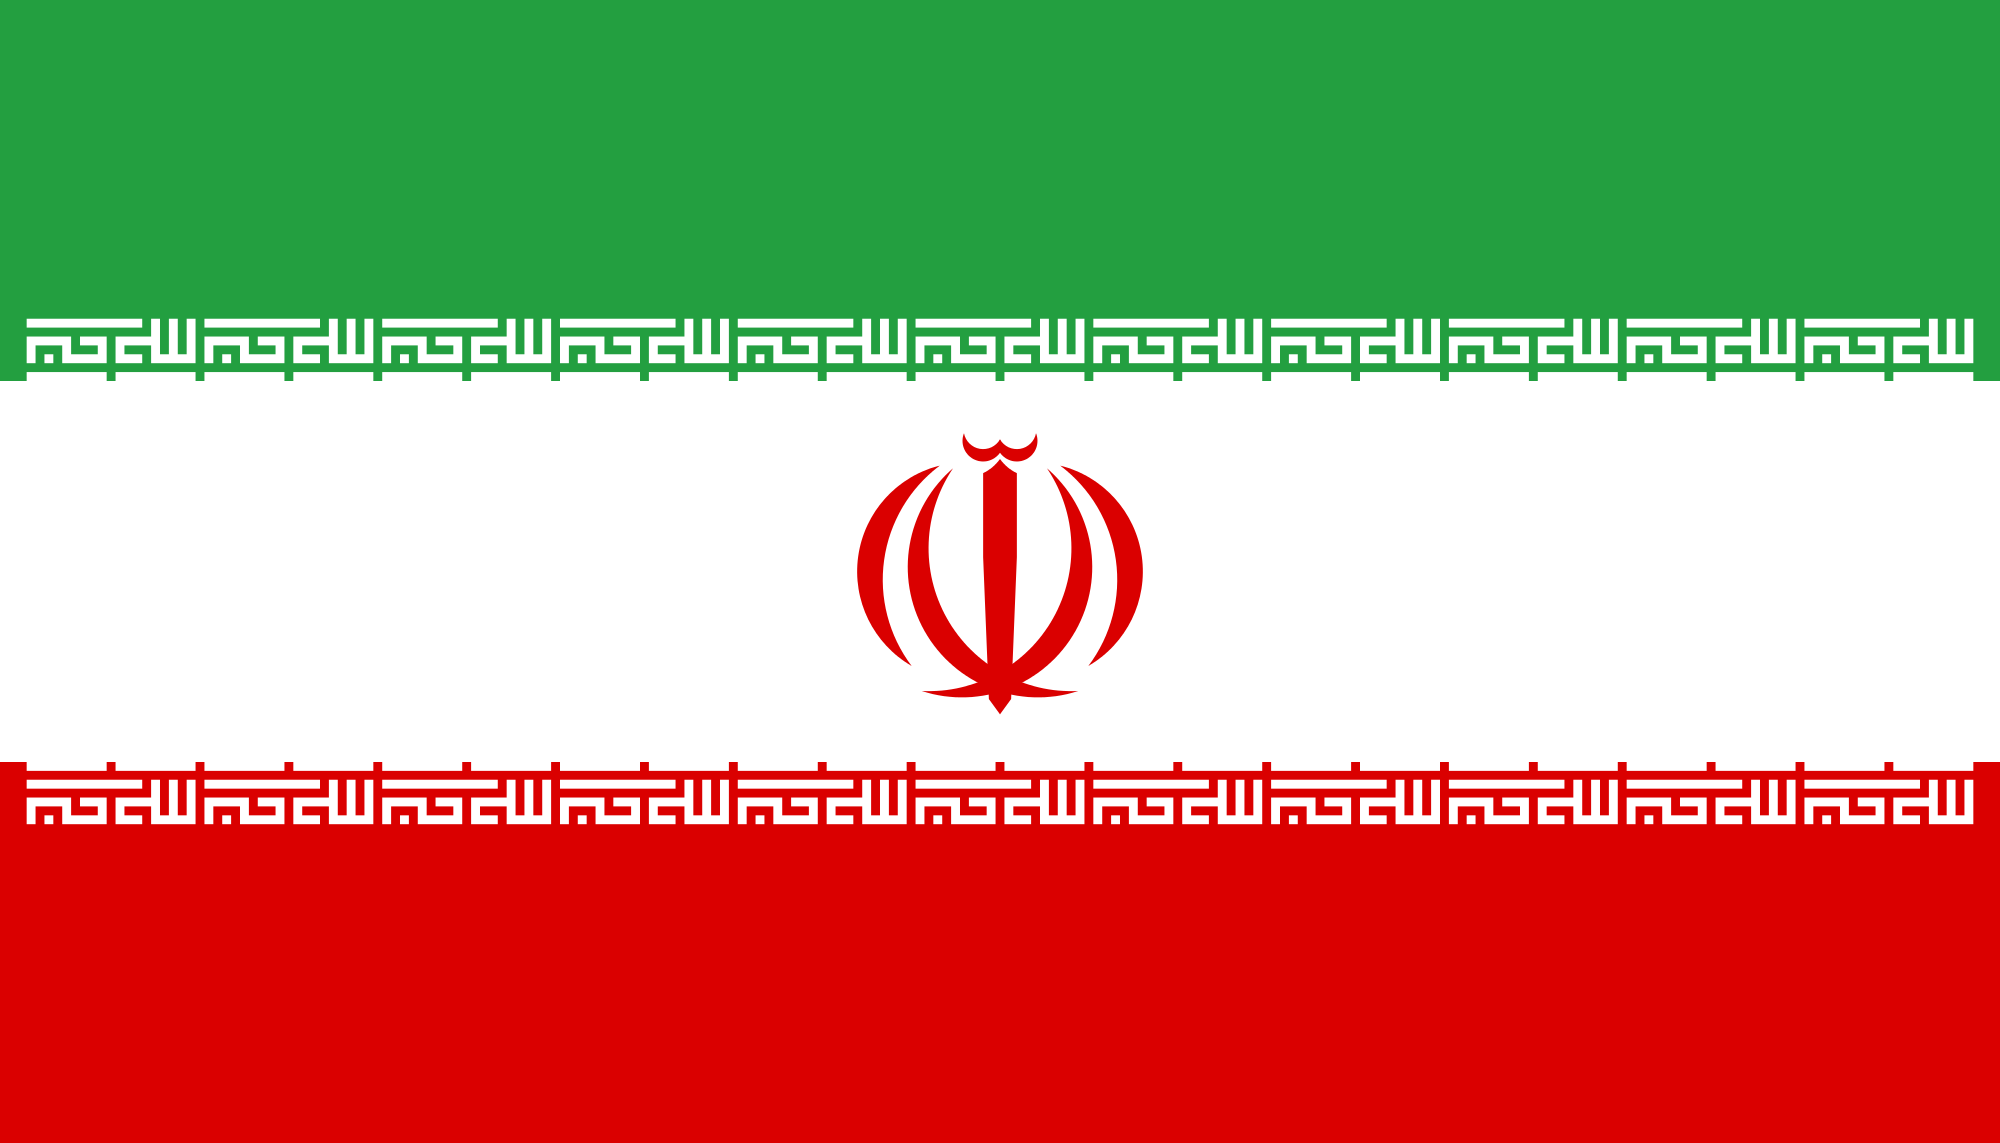  Whereas Saudi Arabia's flag is explicit, the Iranian flag is more cryptic in its symbology. The central e mblem is a highly stylized composite of various Islamic&nbsp;  elements: a geometrically symmetric form of the word Allah&nbsp;  and overlappin